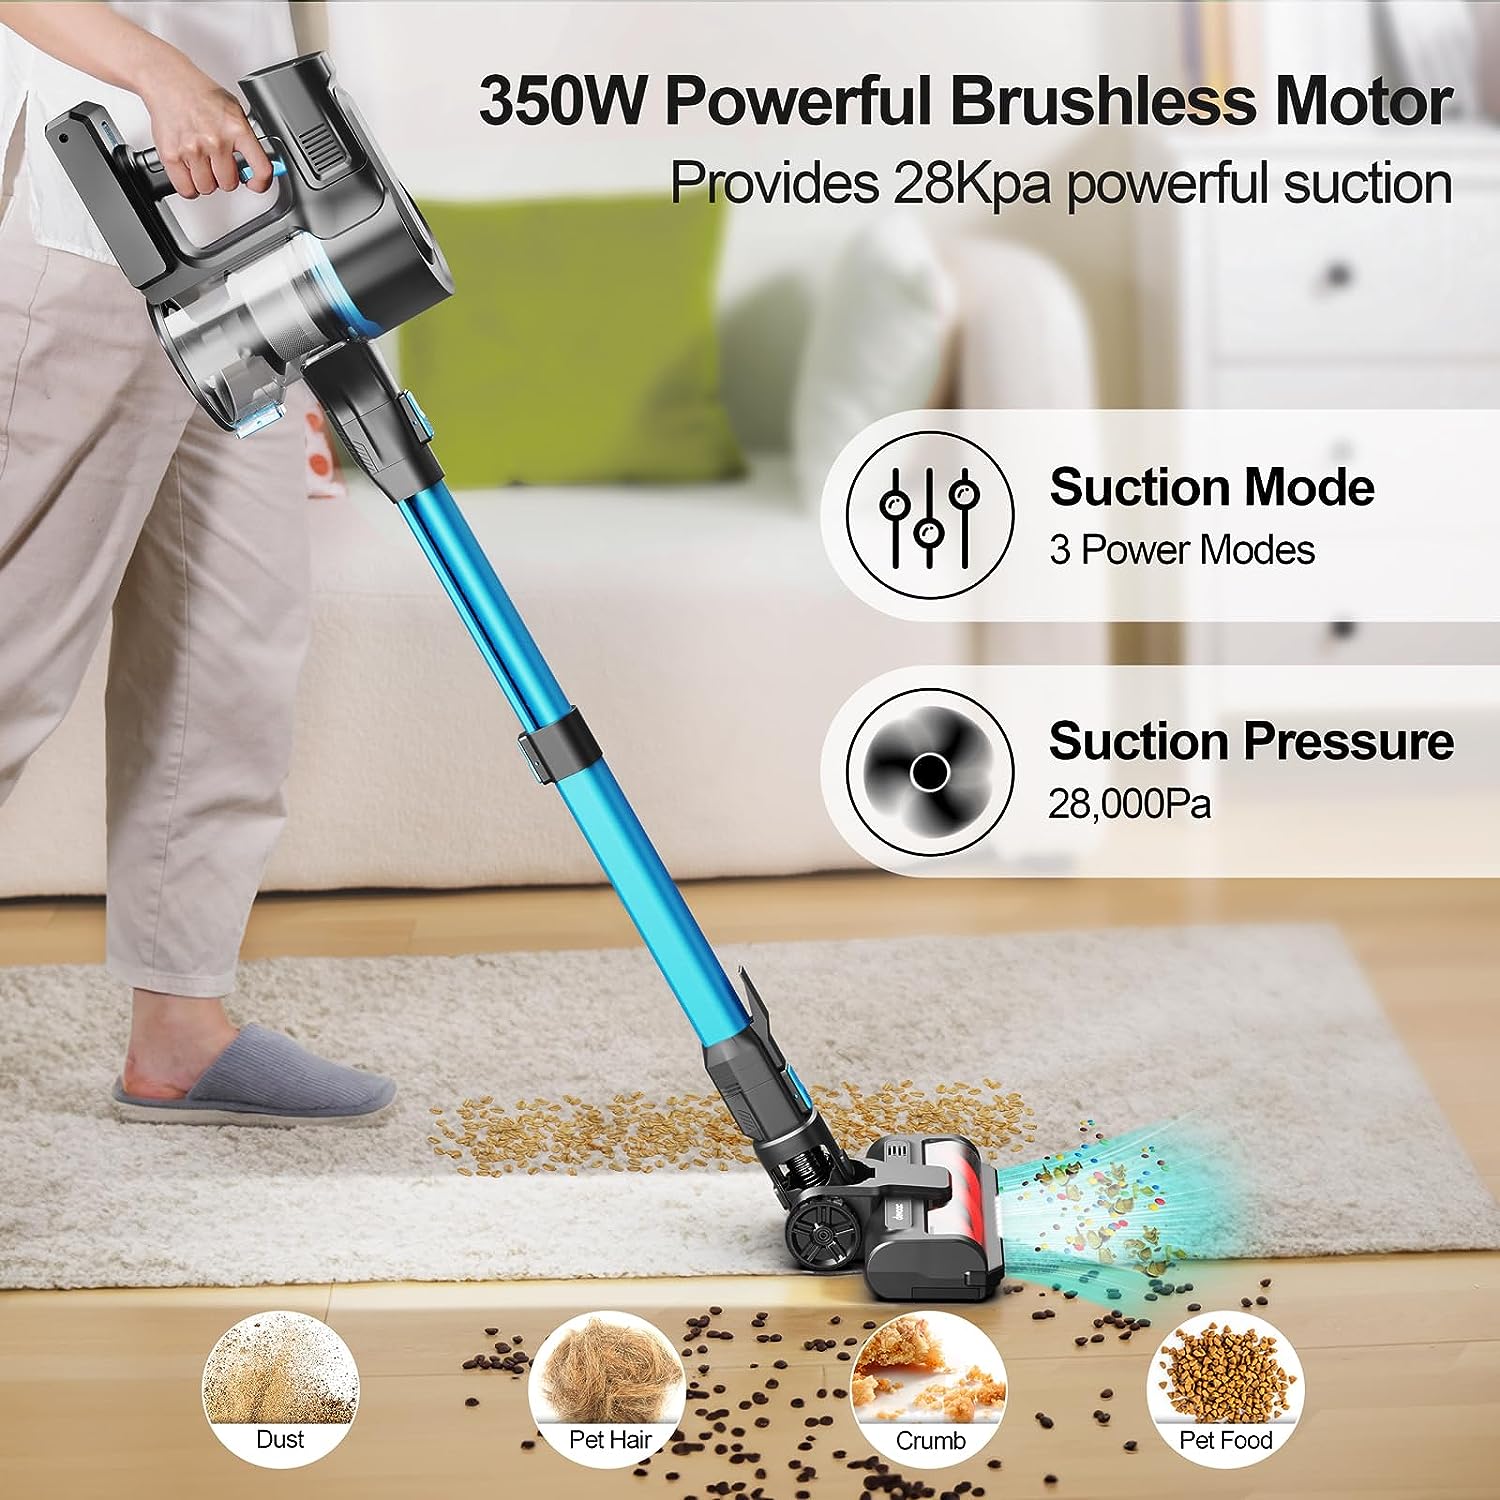 2-IN-1 Cordless Stick and Hand Vacuum - Clean Smarter, Not Harder